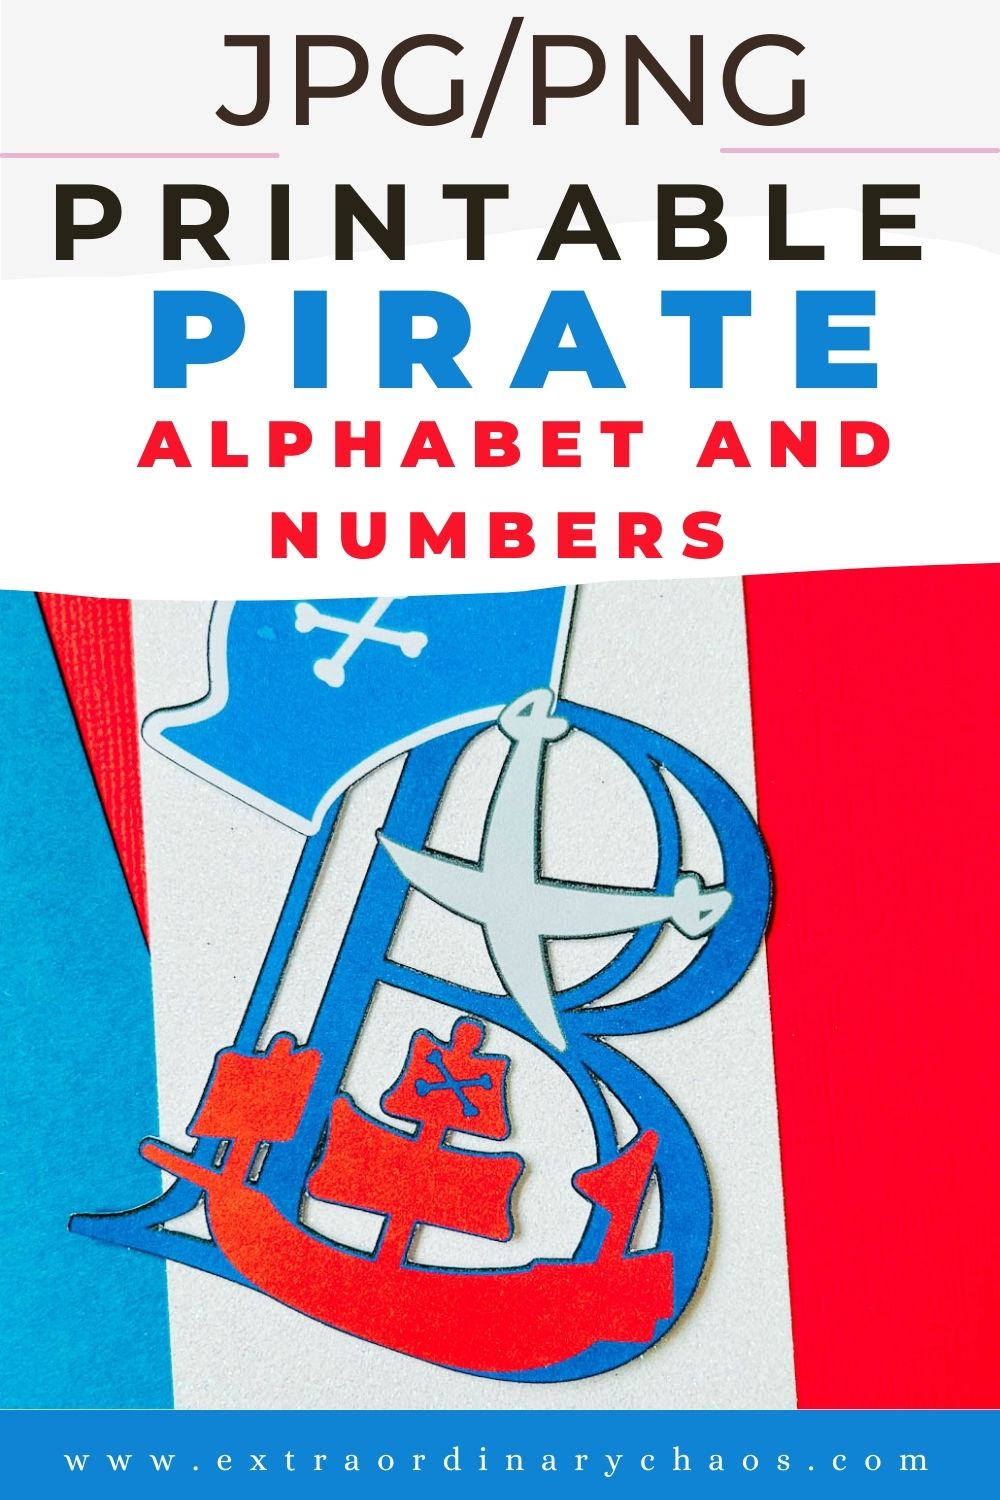 Pirate printable alphabet and numbers For Cricut, Silhouette